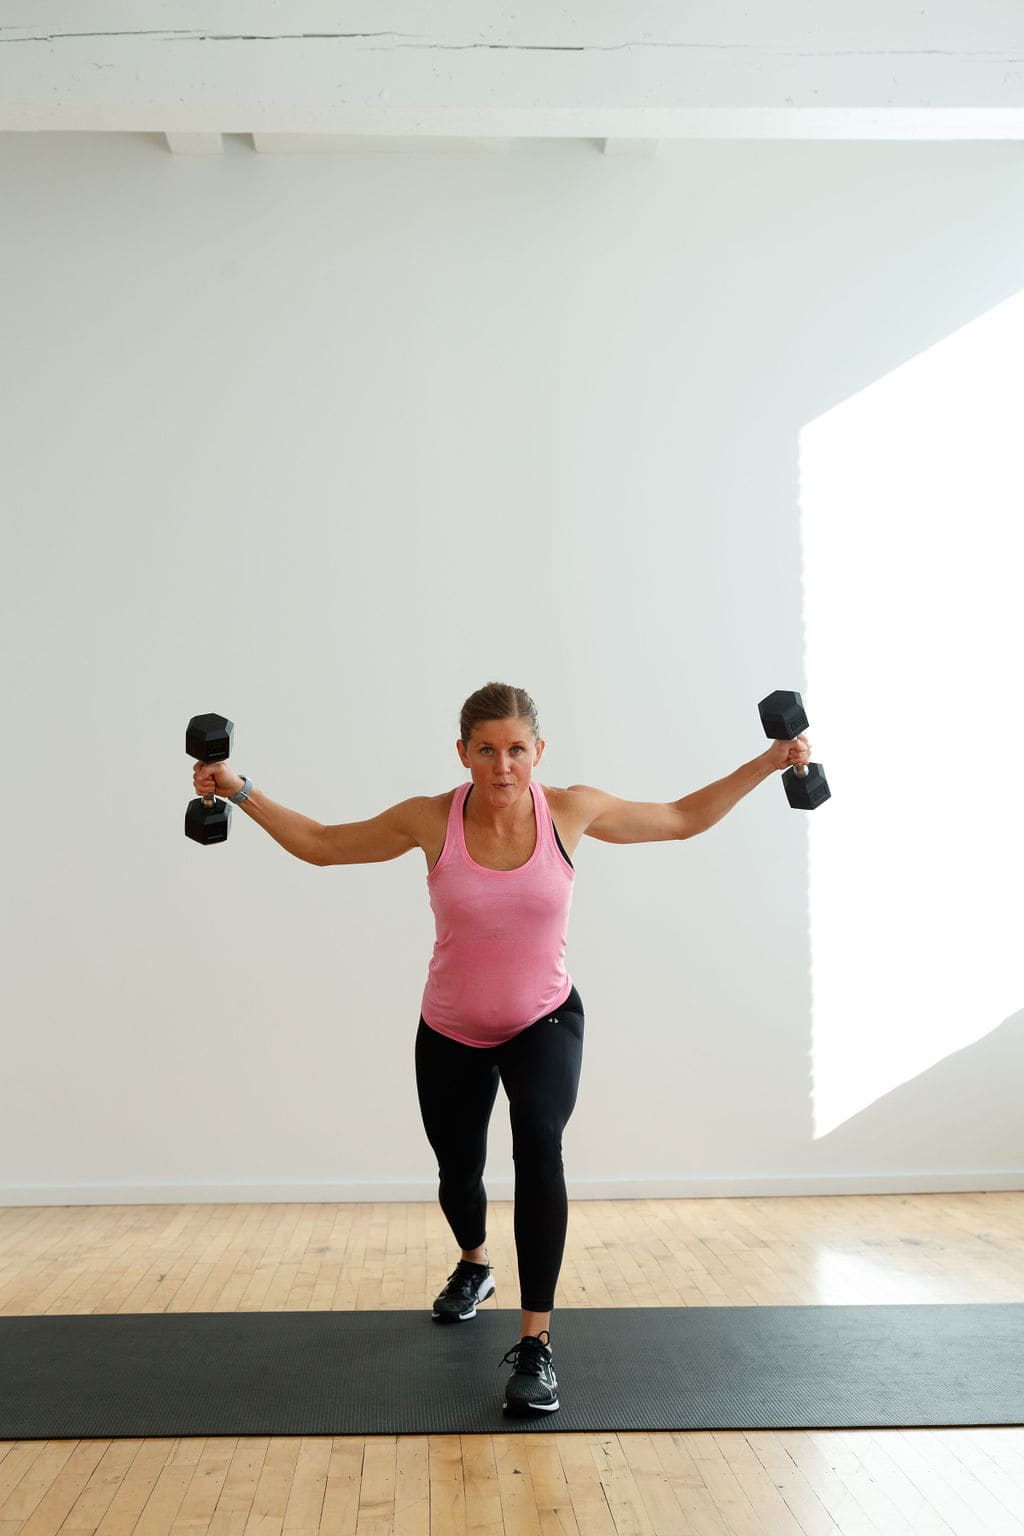 5 Chest Exercises That Will Make Your Arms Look Toned! - Nourish